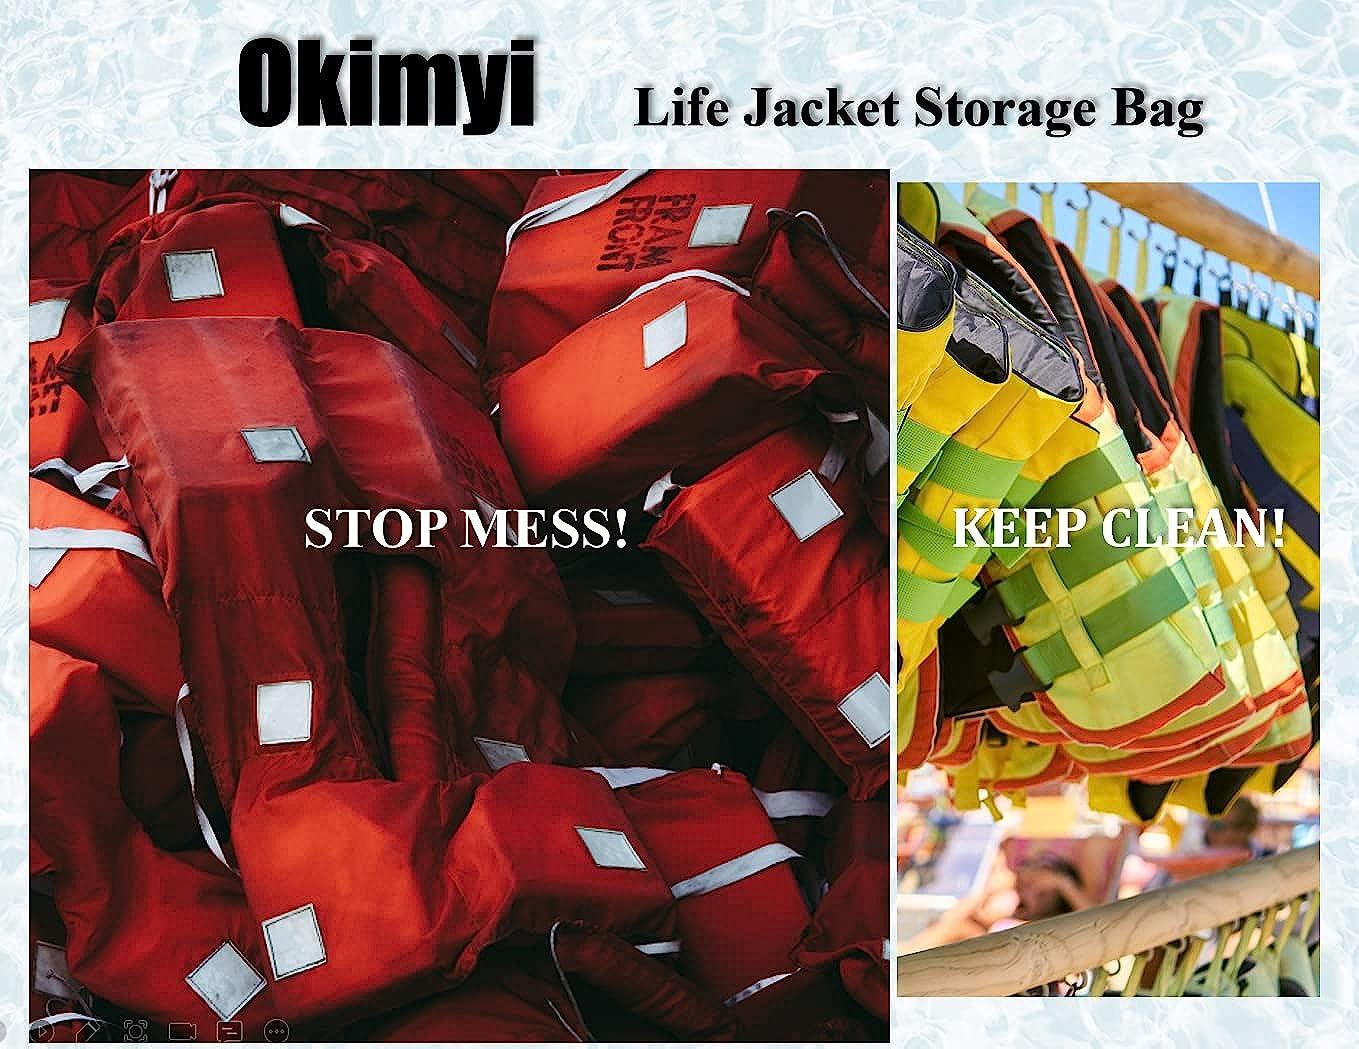 Okimyi Life Jacket Storage Bag, Reusable Storage Bag for T Top Boat, Holds  up to 6 Type II Life Jackets -Life Jackets not Included